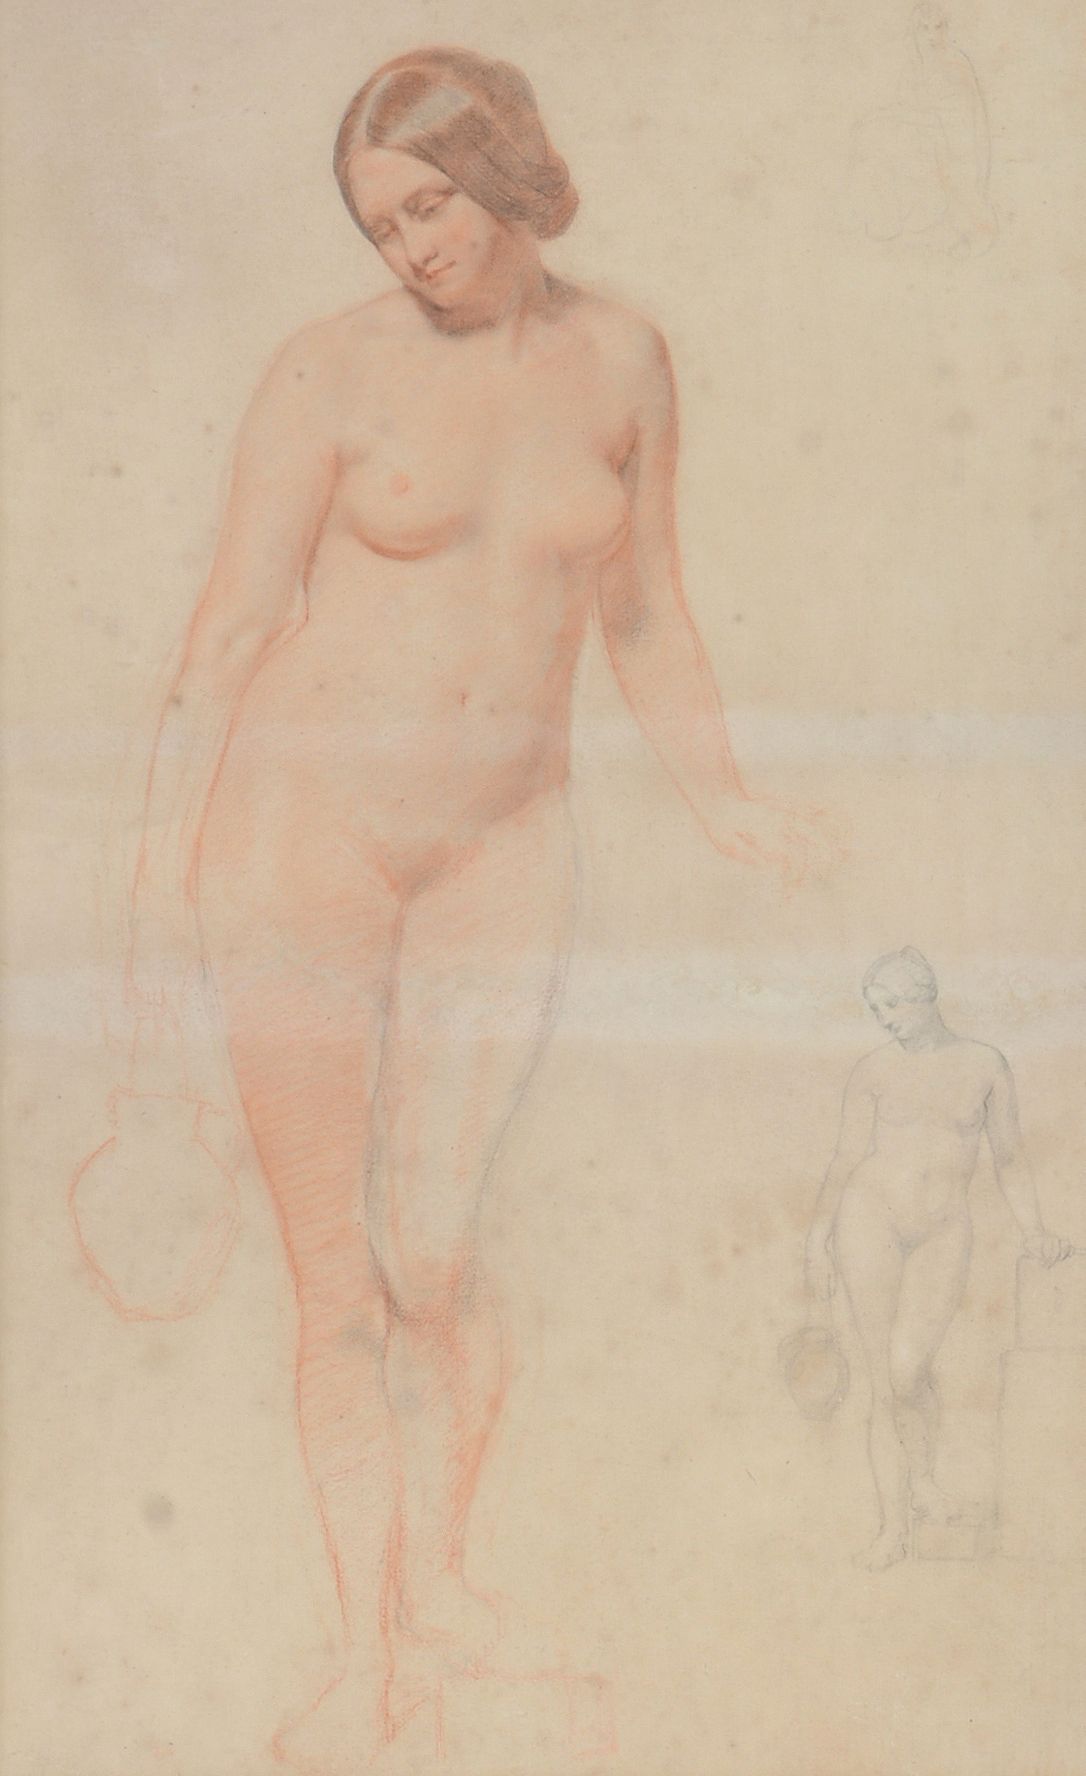 Attributed to William Mulready (1786-1863) - Academic study of a female nude holding a jug Red